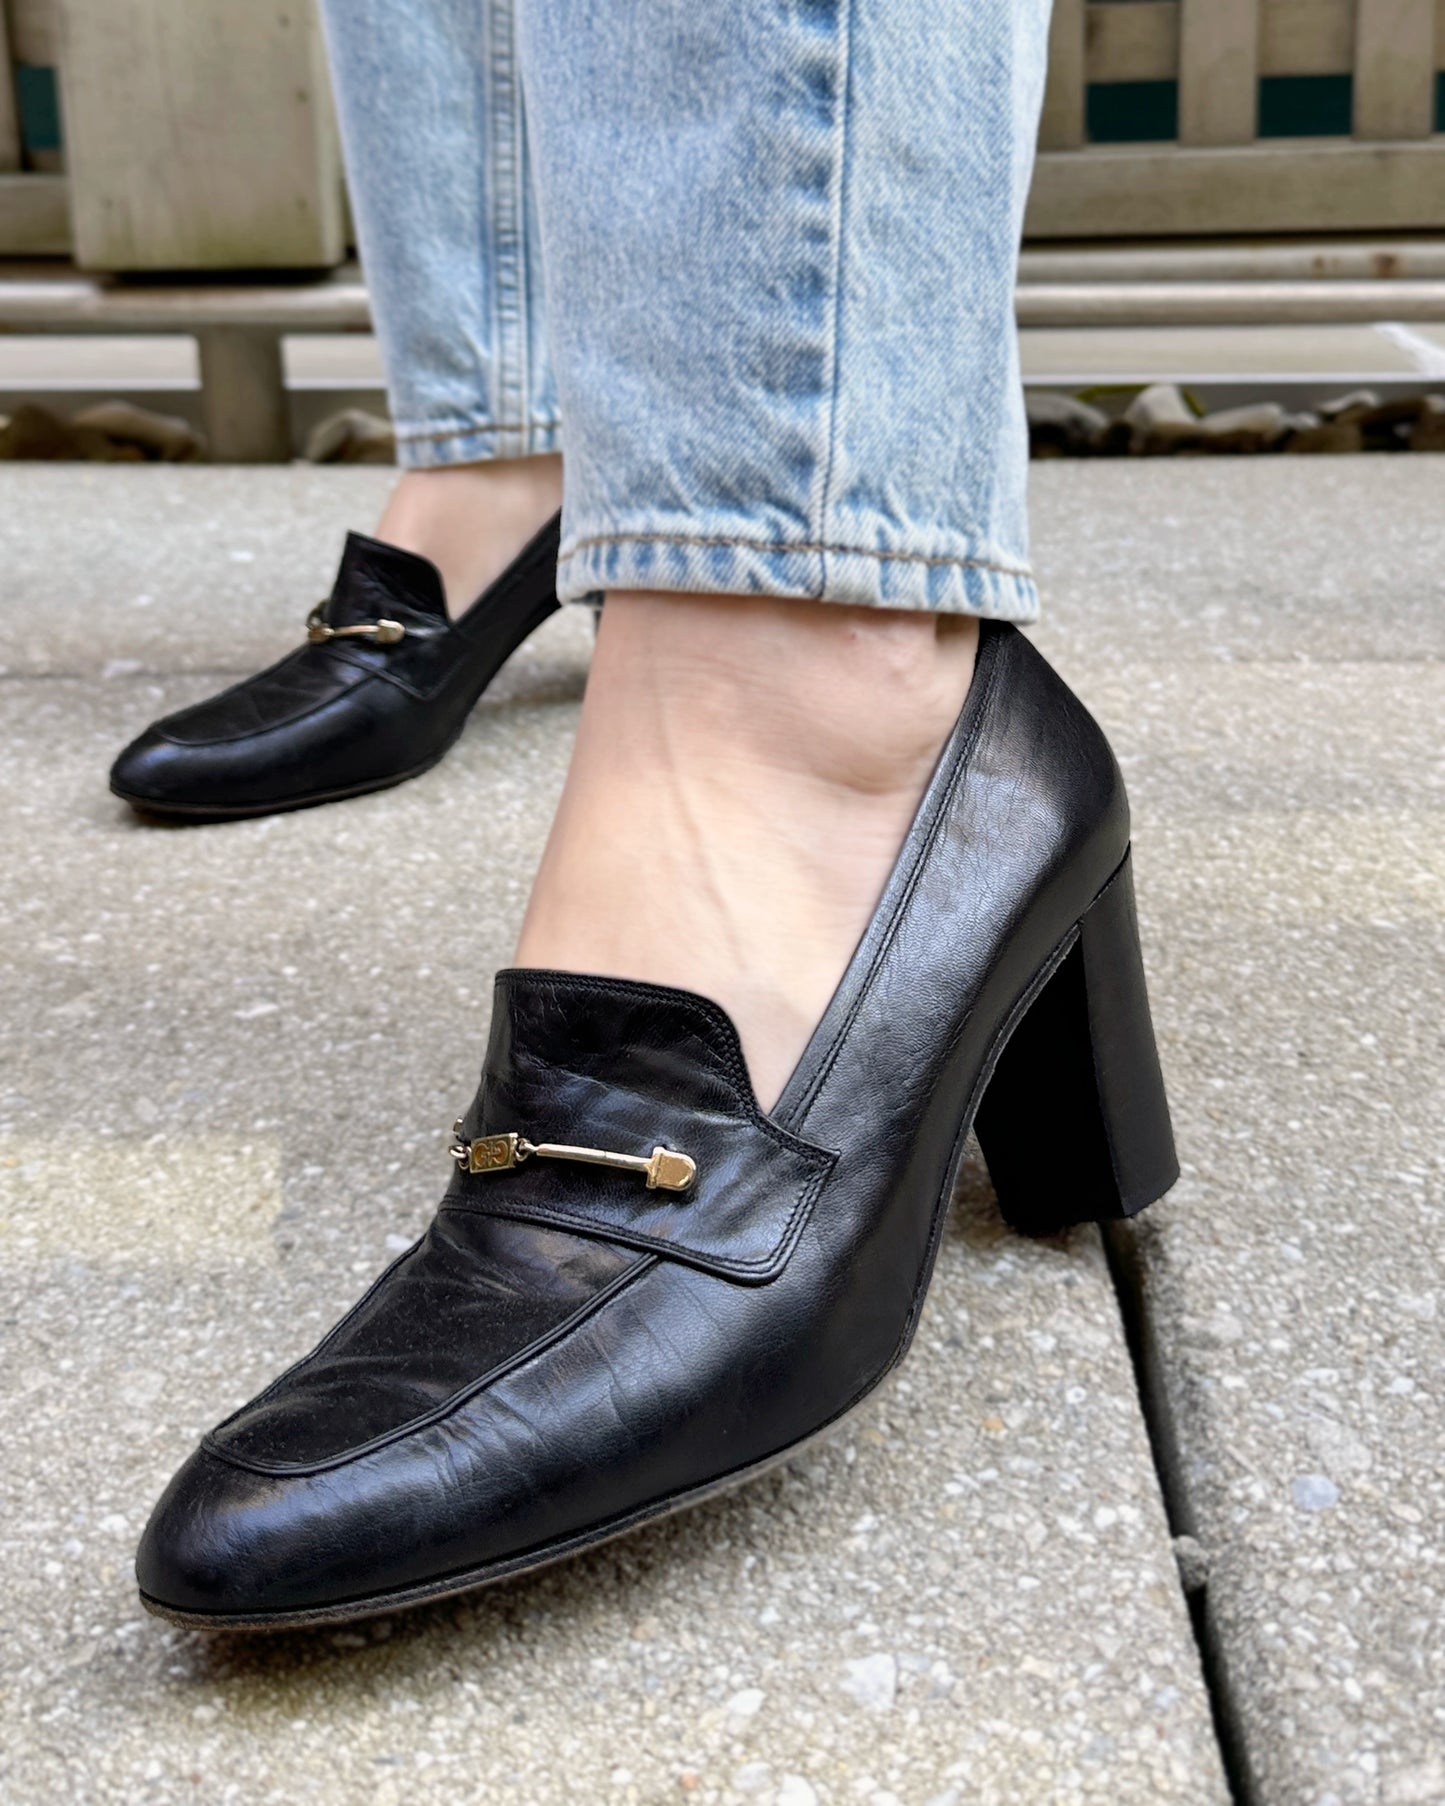 VINTAGE 1970s GUCCI HEELED LOAFERS